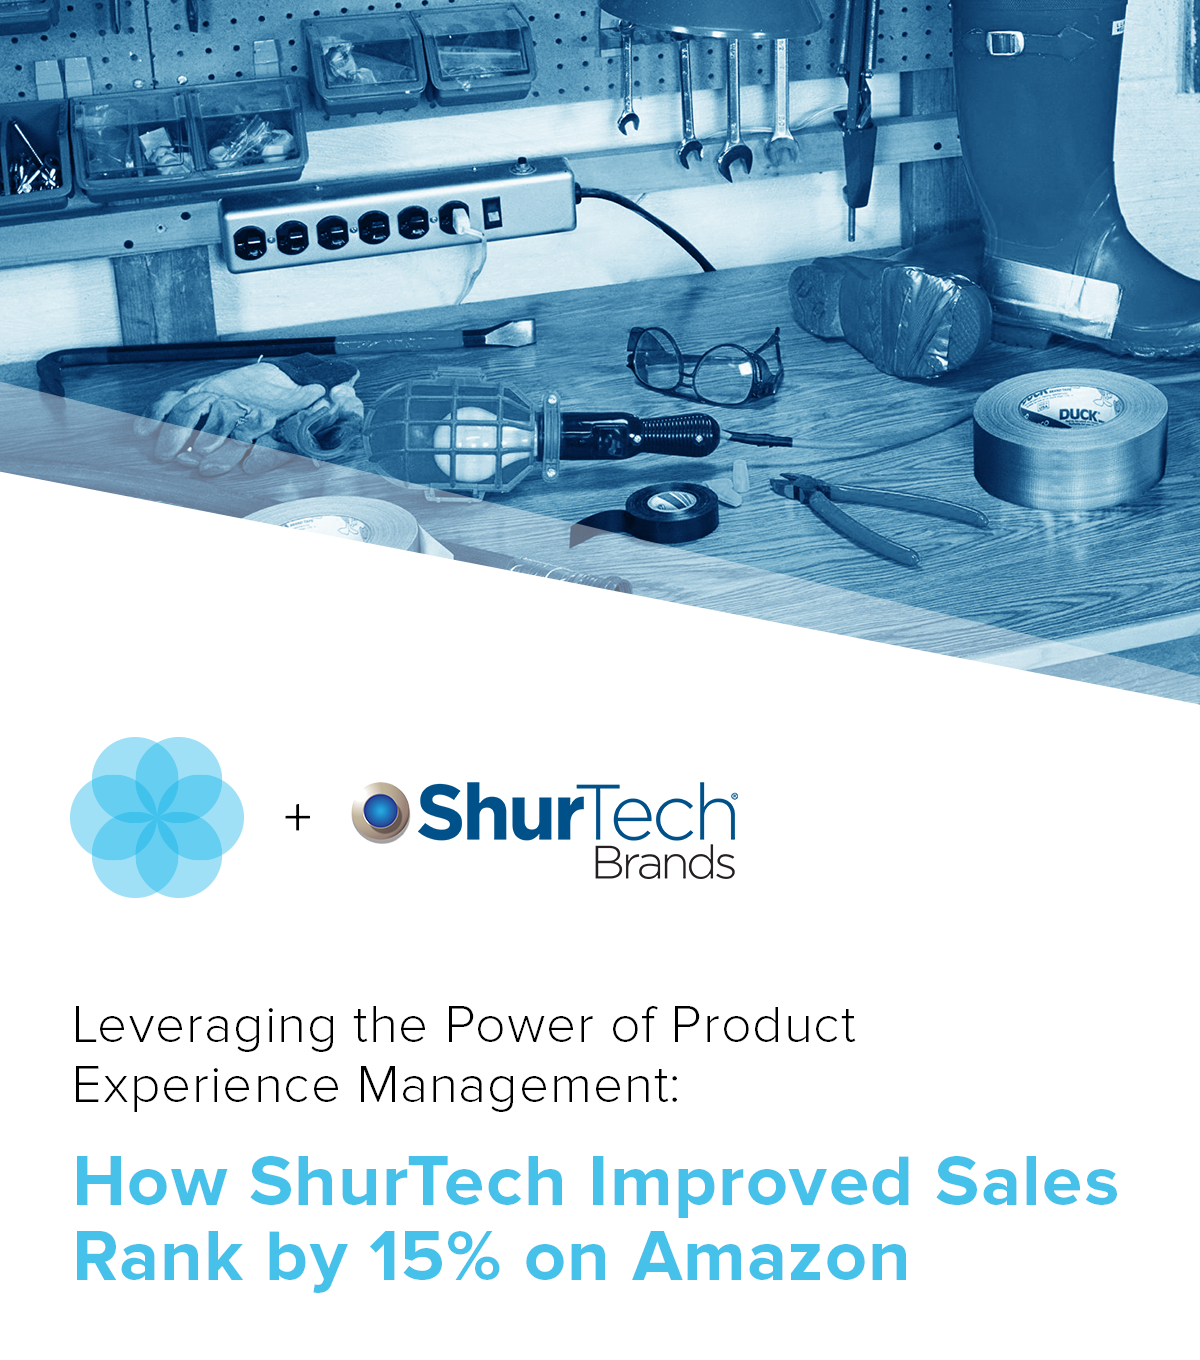 Case Study: How ShurTech Improved Amazon Sales Rank by 15%